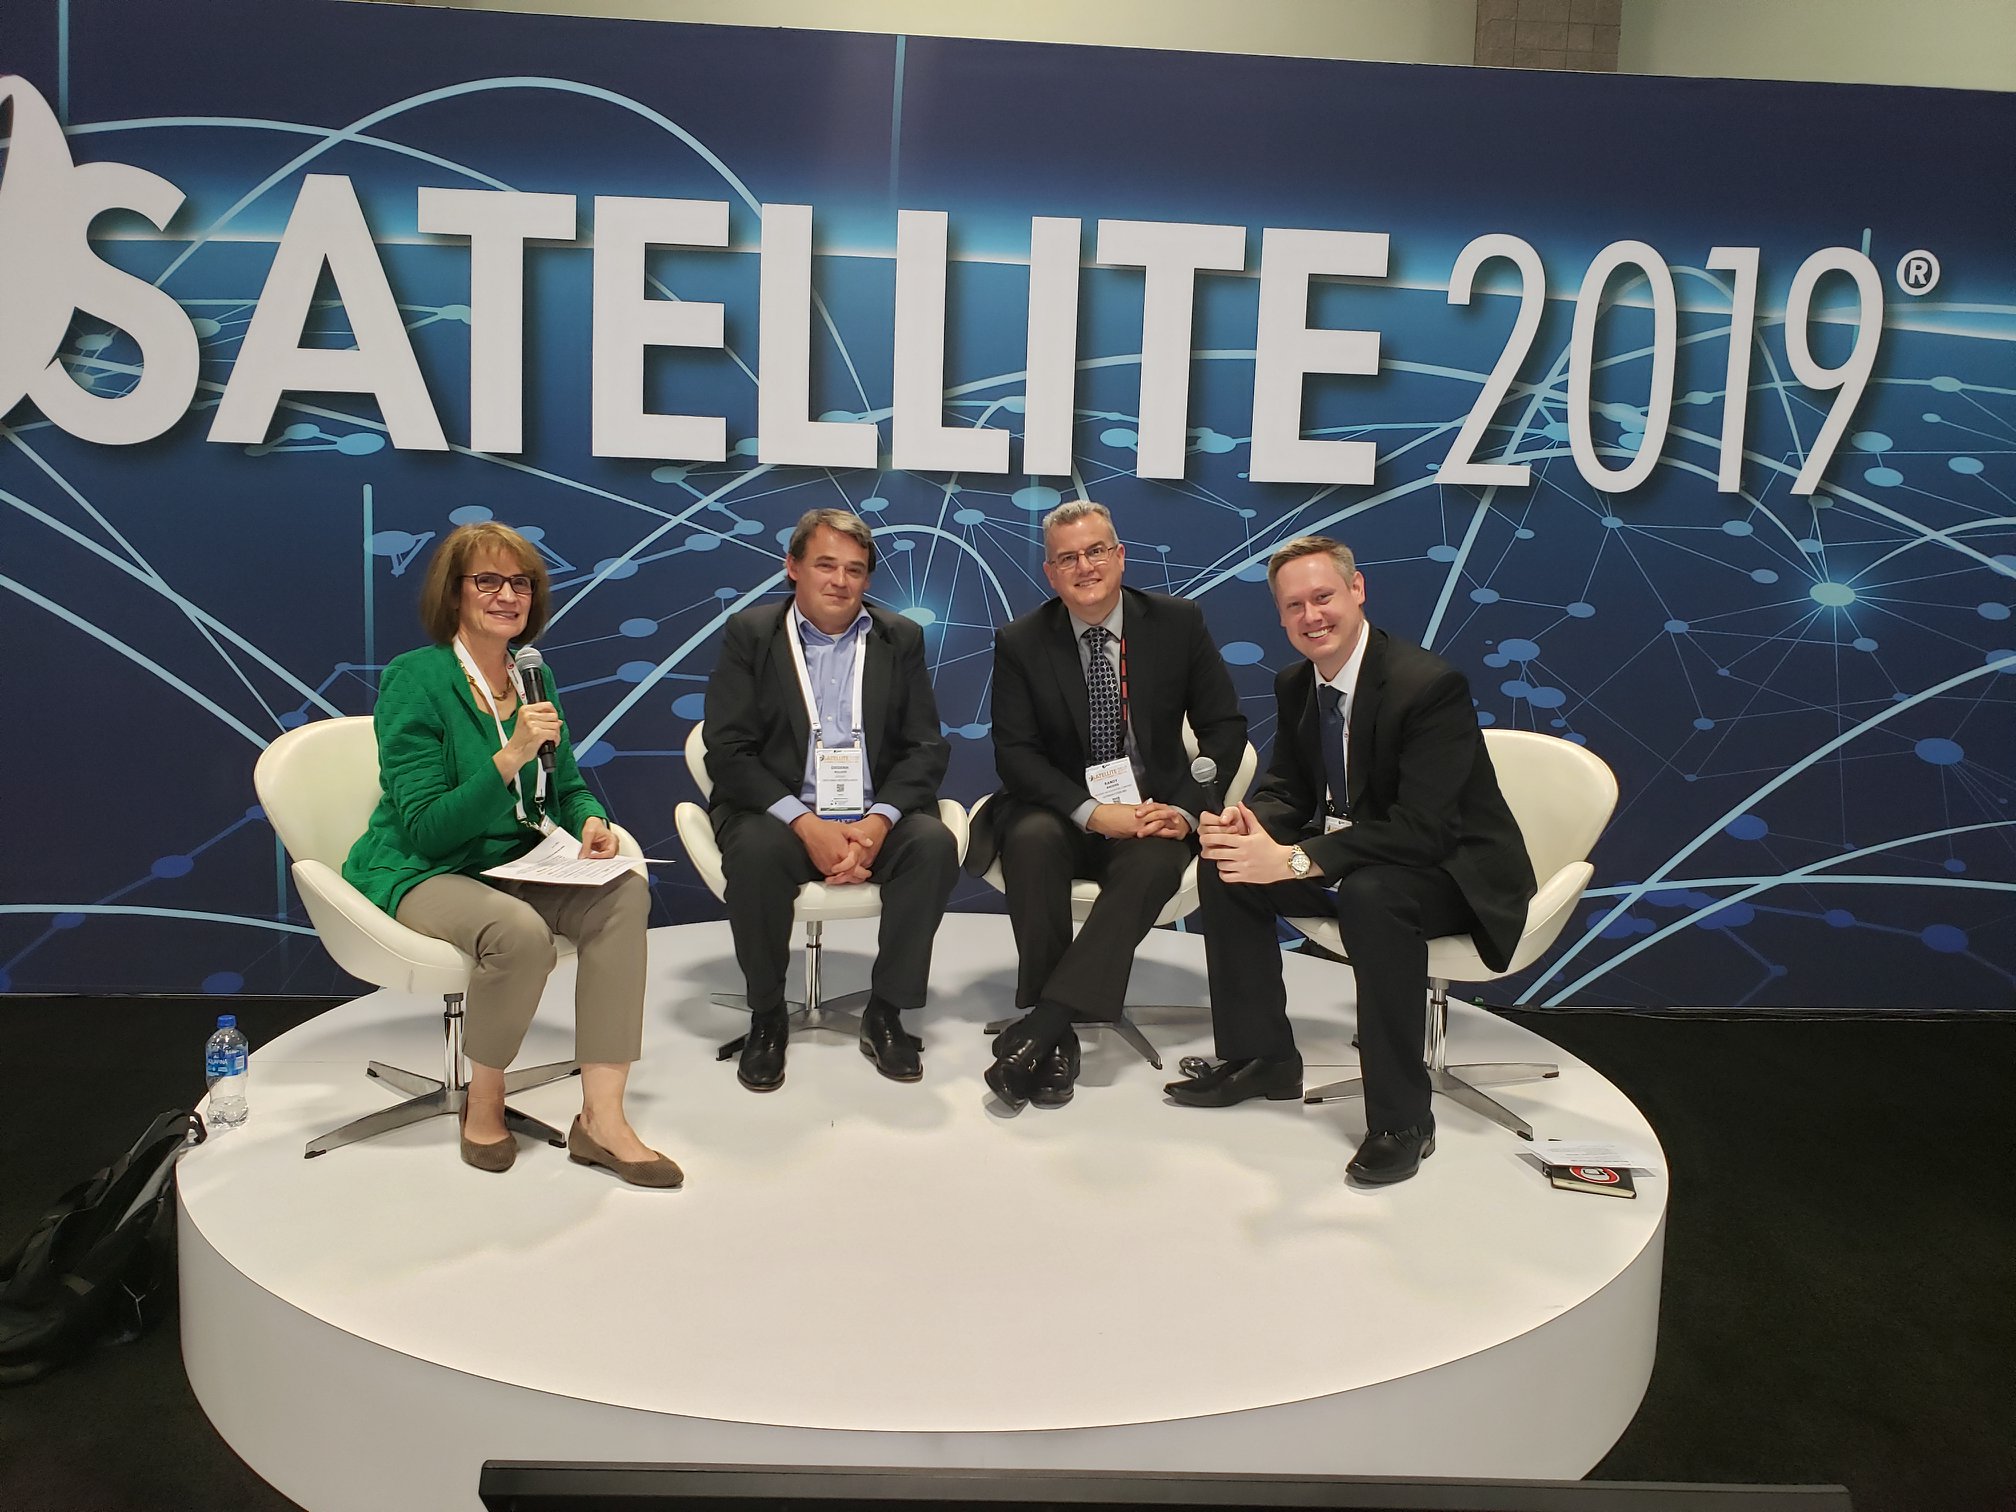 Intergalactic Education at Satellite 2019 Conference